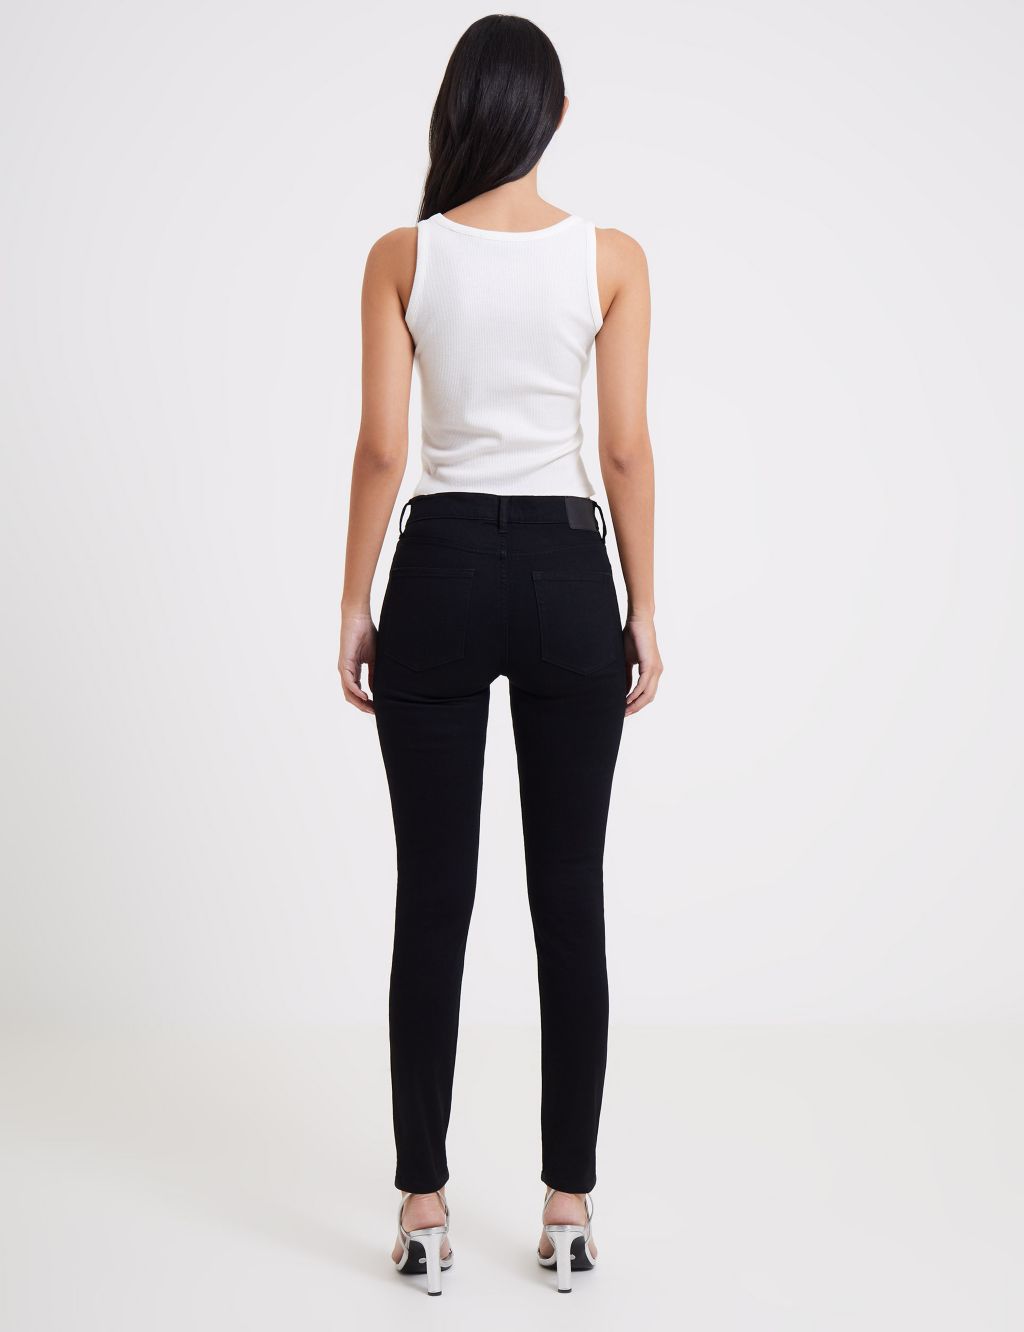 High Waisted Skinny Ankle Grazer Jeans image 3